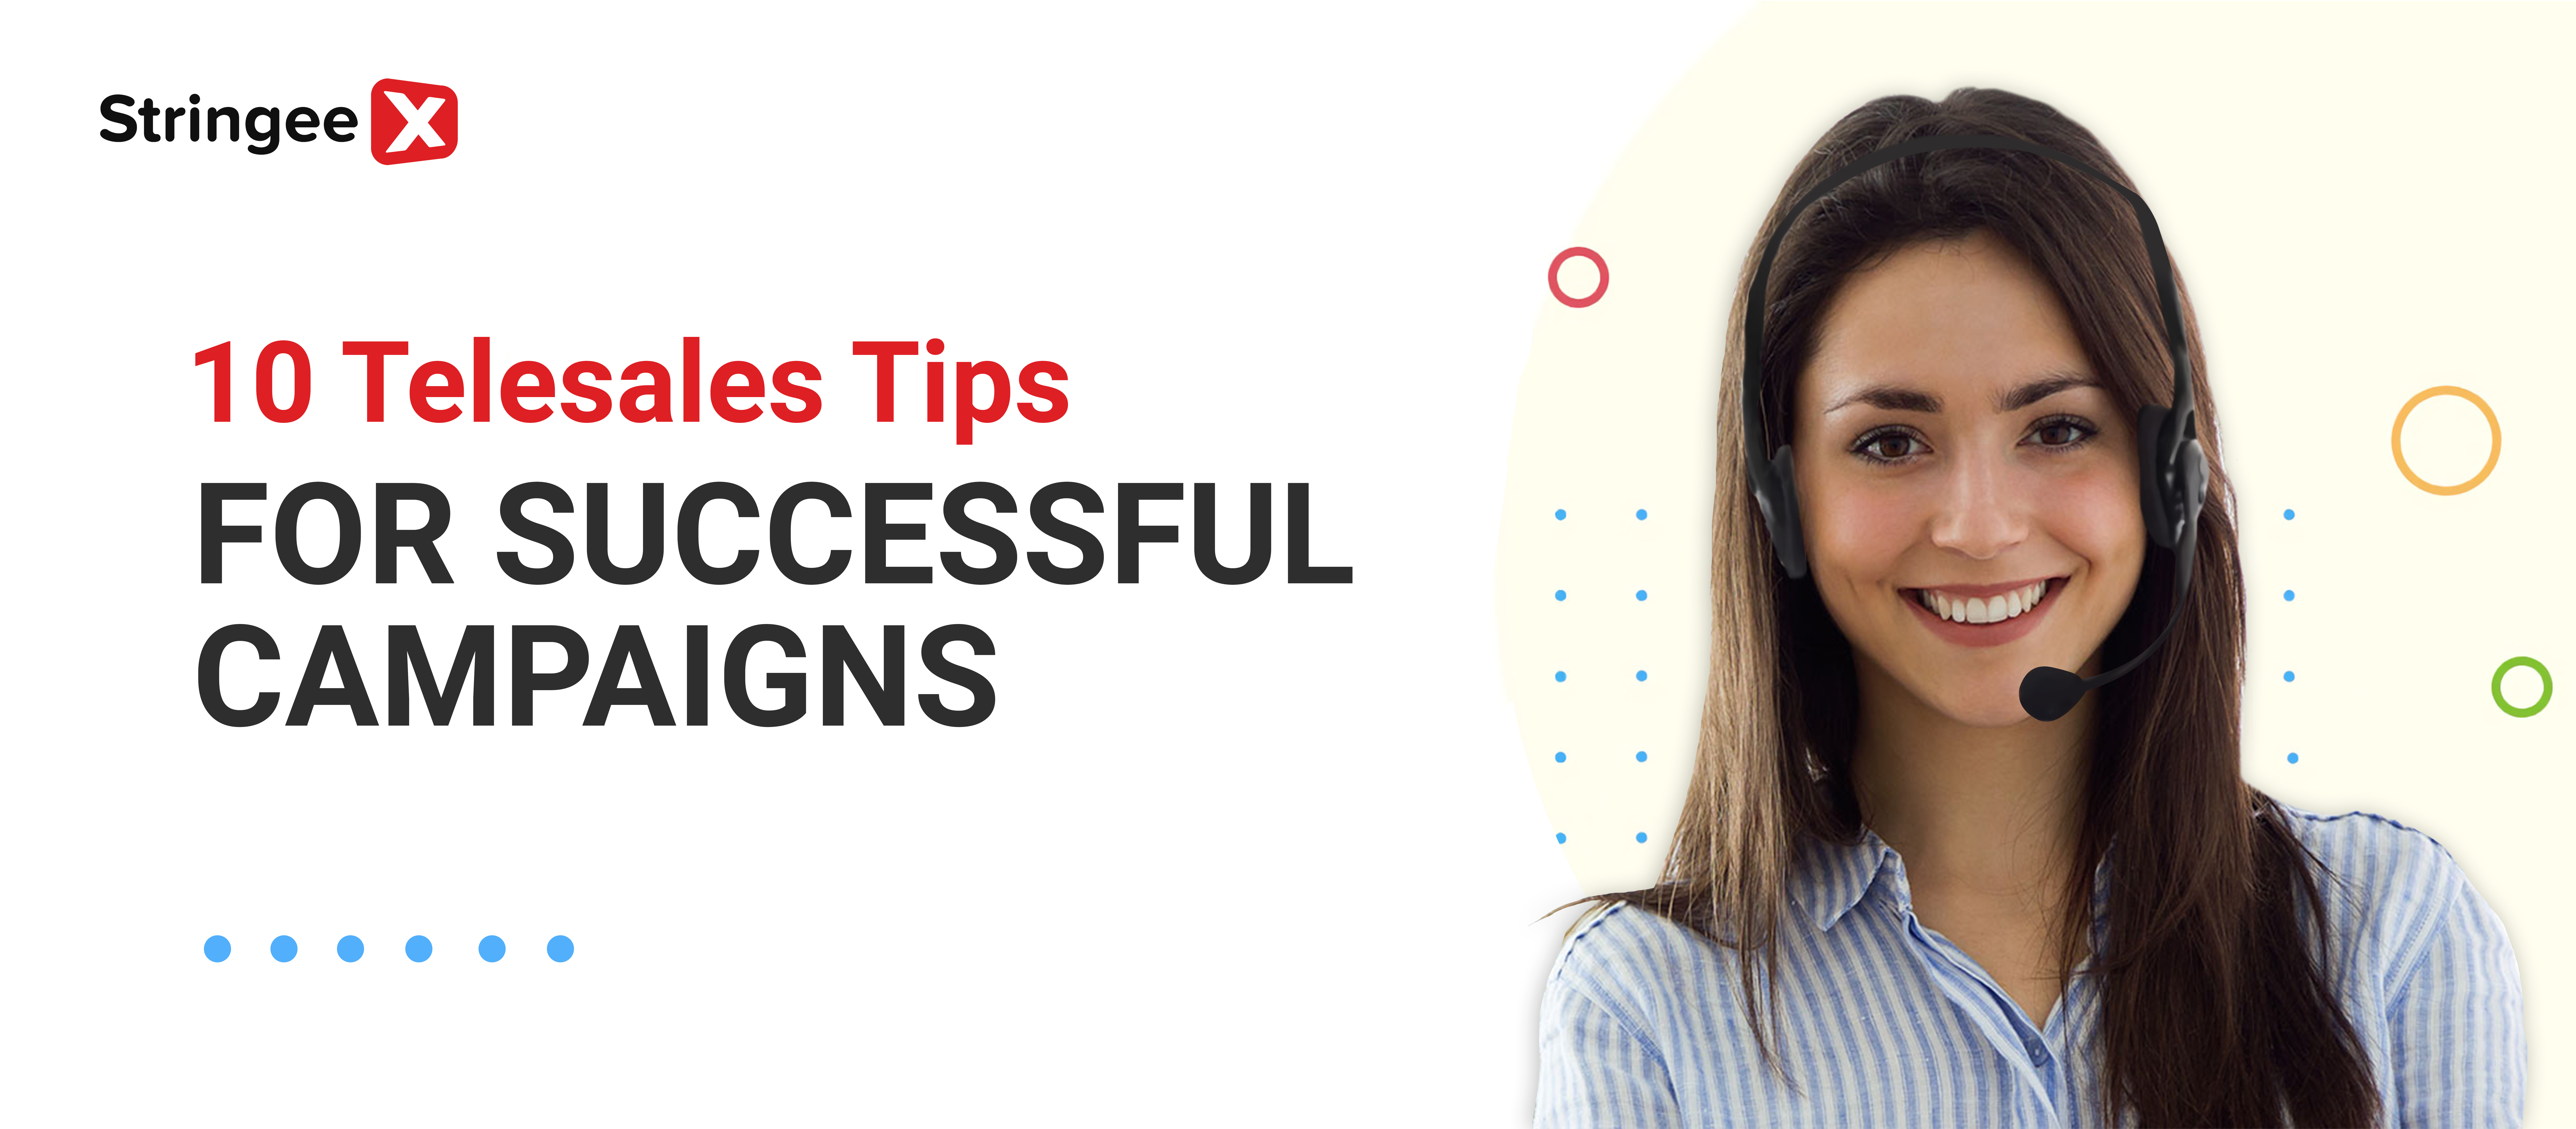 10 Telesales Tips For Successful Campaigns